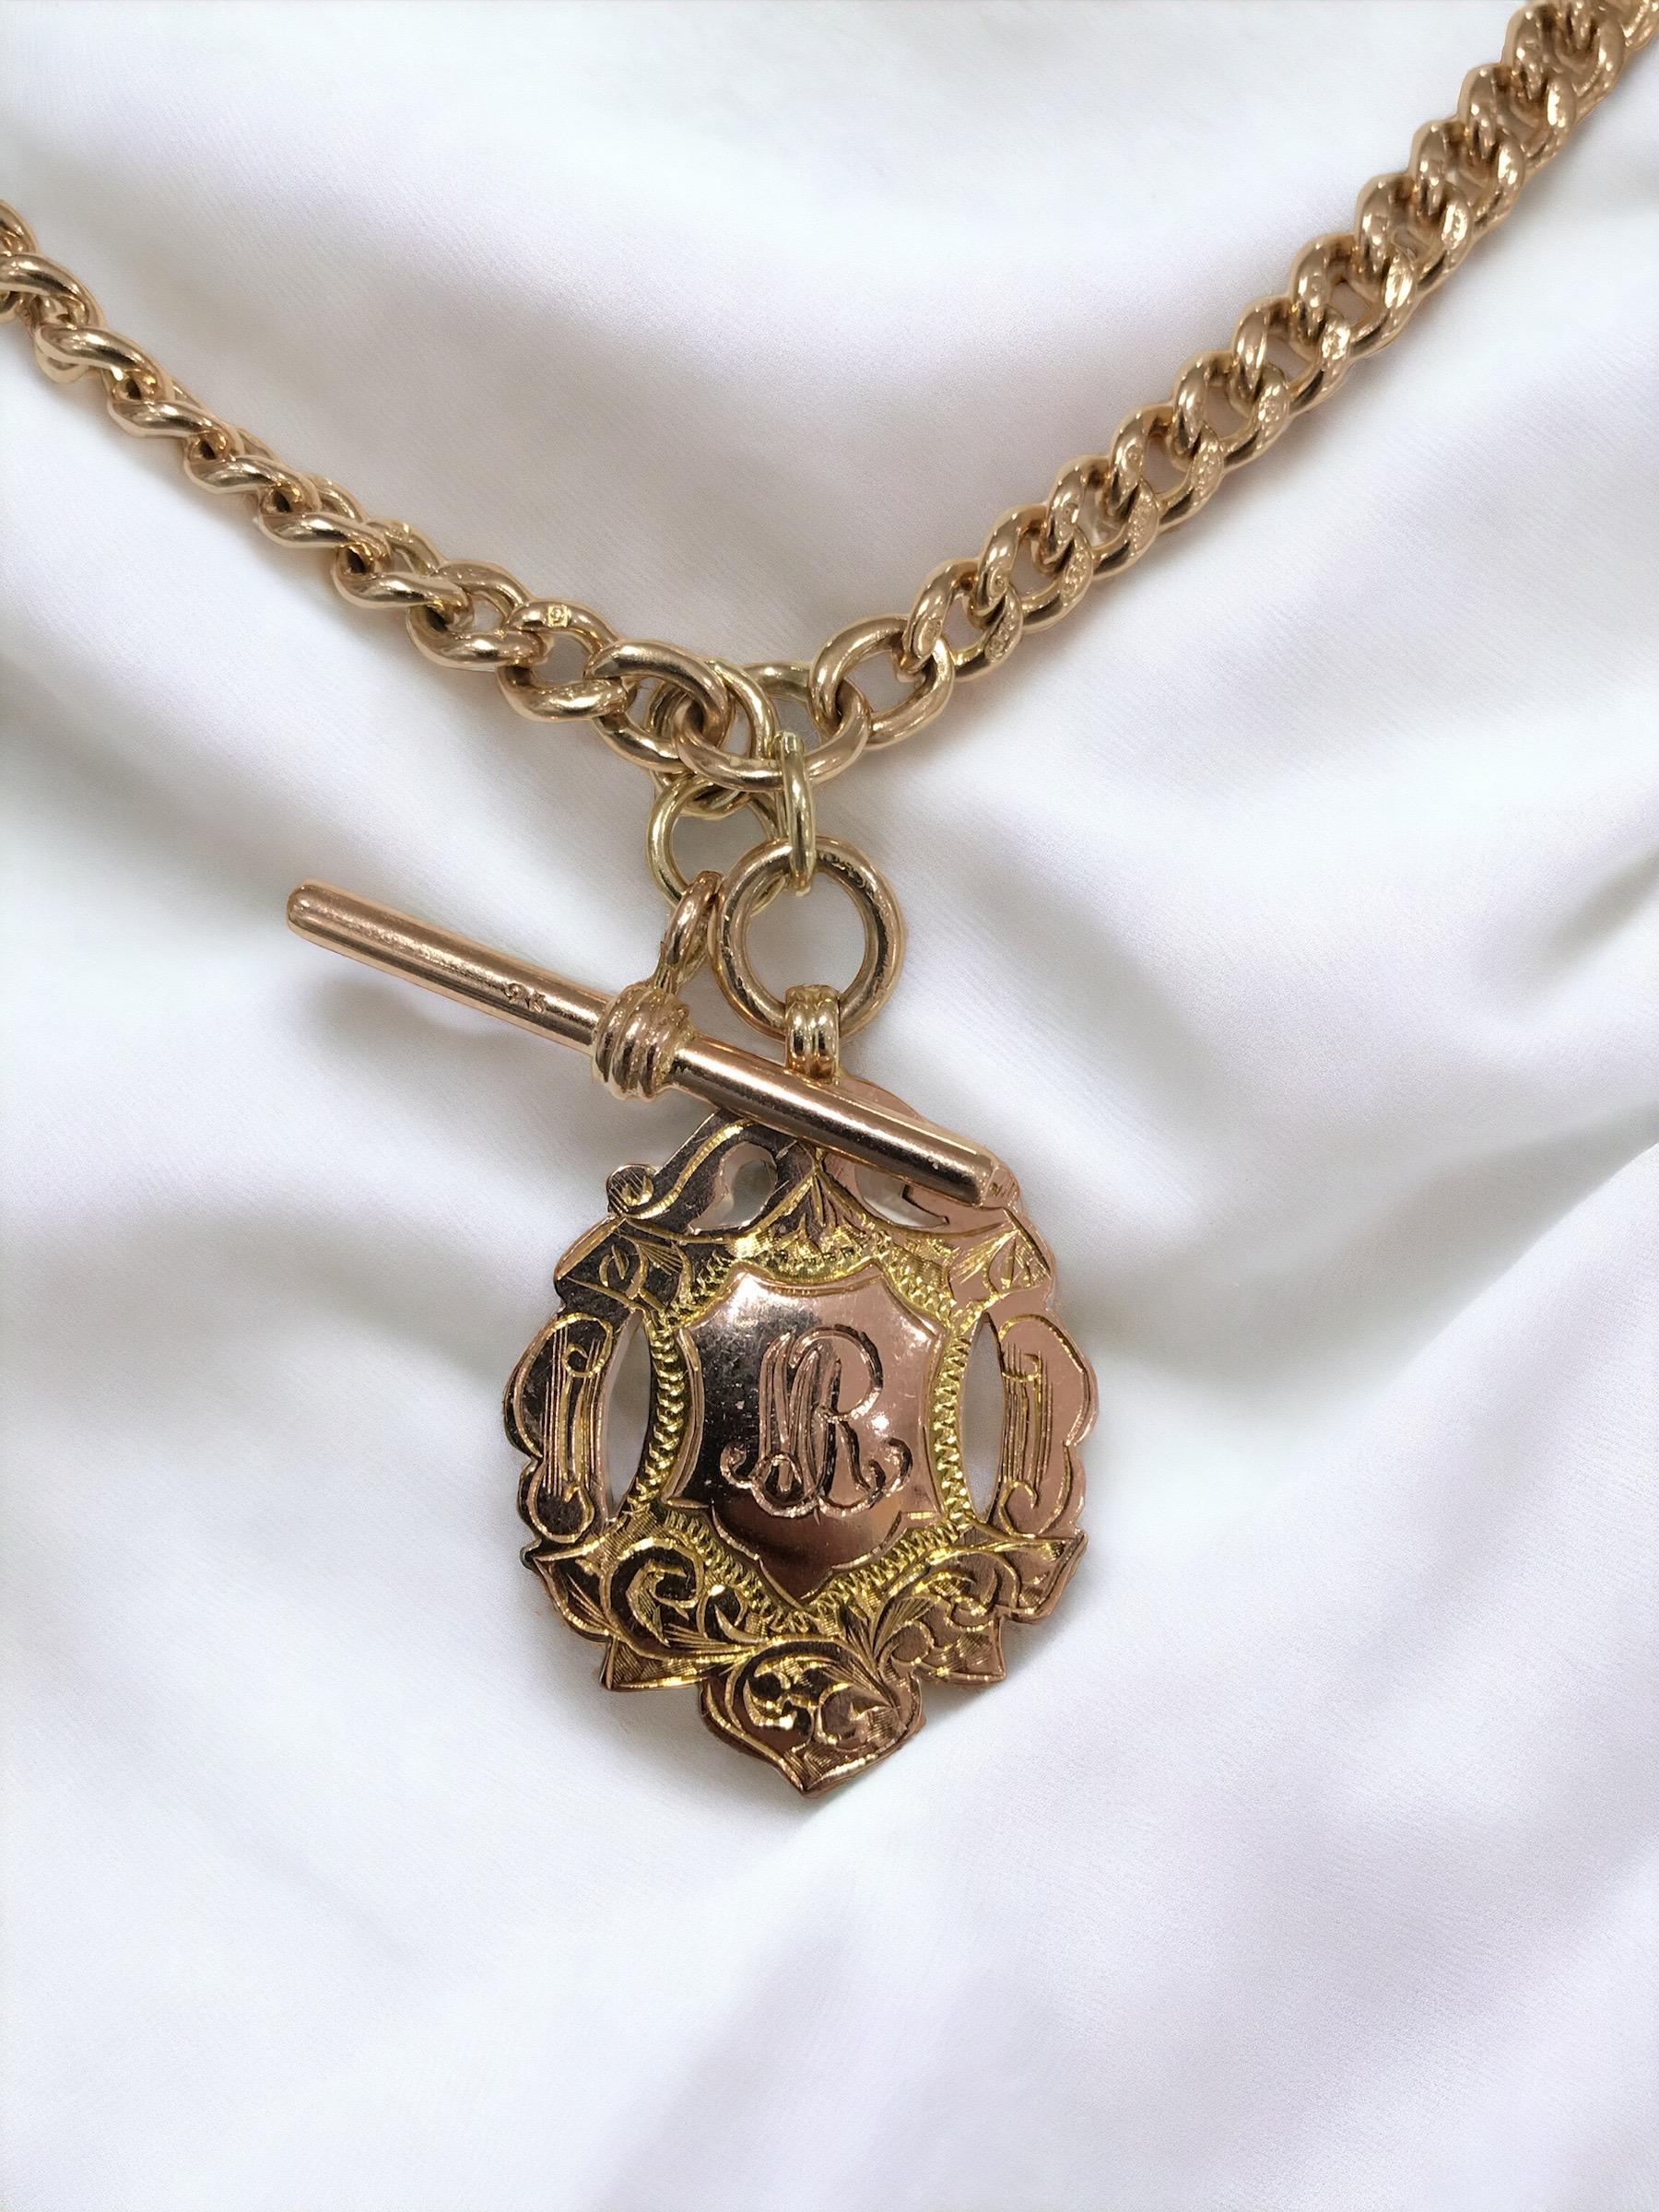 We absolutely love this vintage beauty!
She was likely used as a chain for a pocket watch & later converted to be used as a beautiful necklace.
The charm is a lovely shield shape & is engraved, MR, and has green gold accents around the shield.
Each